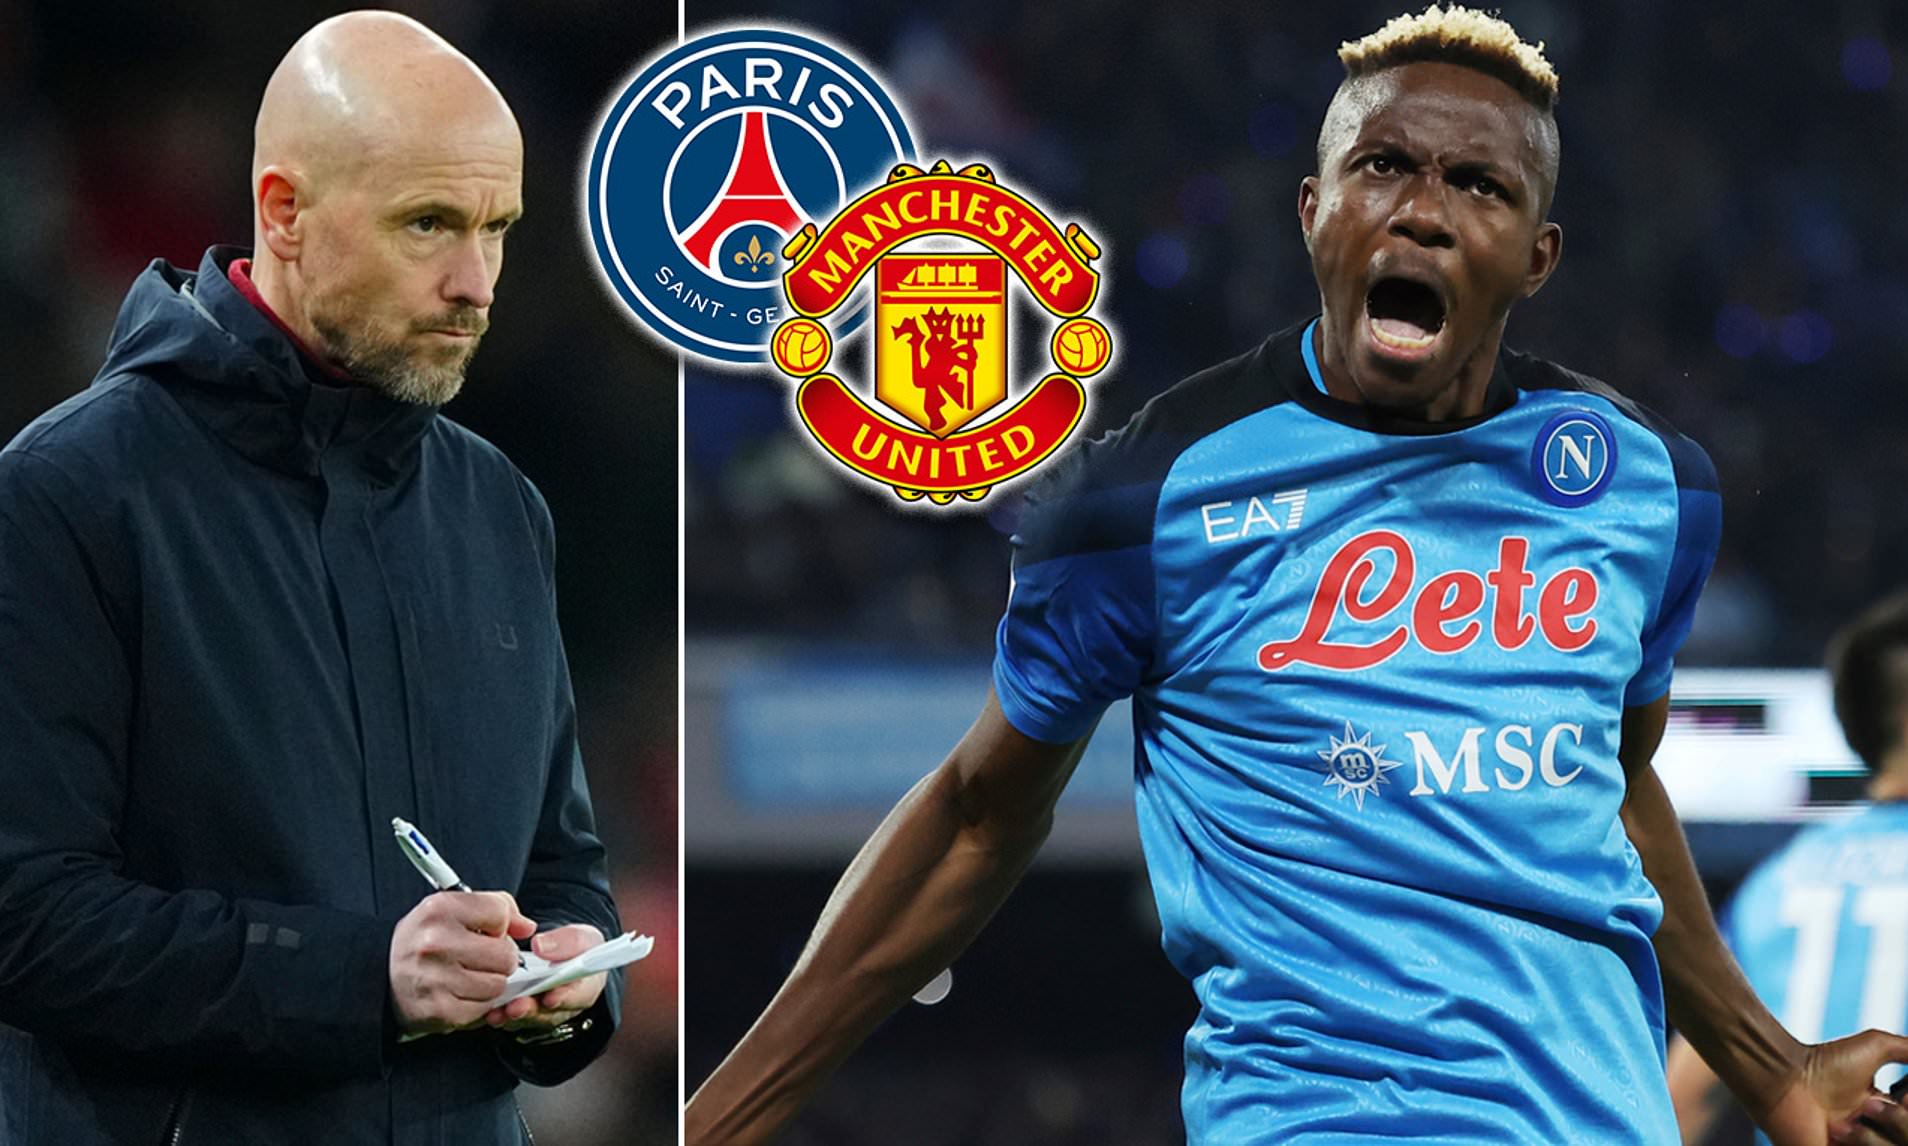 Lionel Messi to hand Man Utd transfer blow as PSG poised to replace icon with £140m Ten Hag target - Bóng Đá